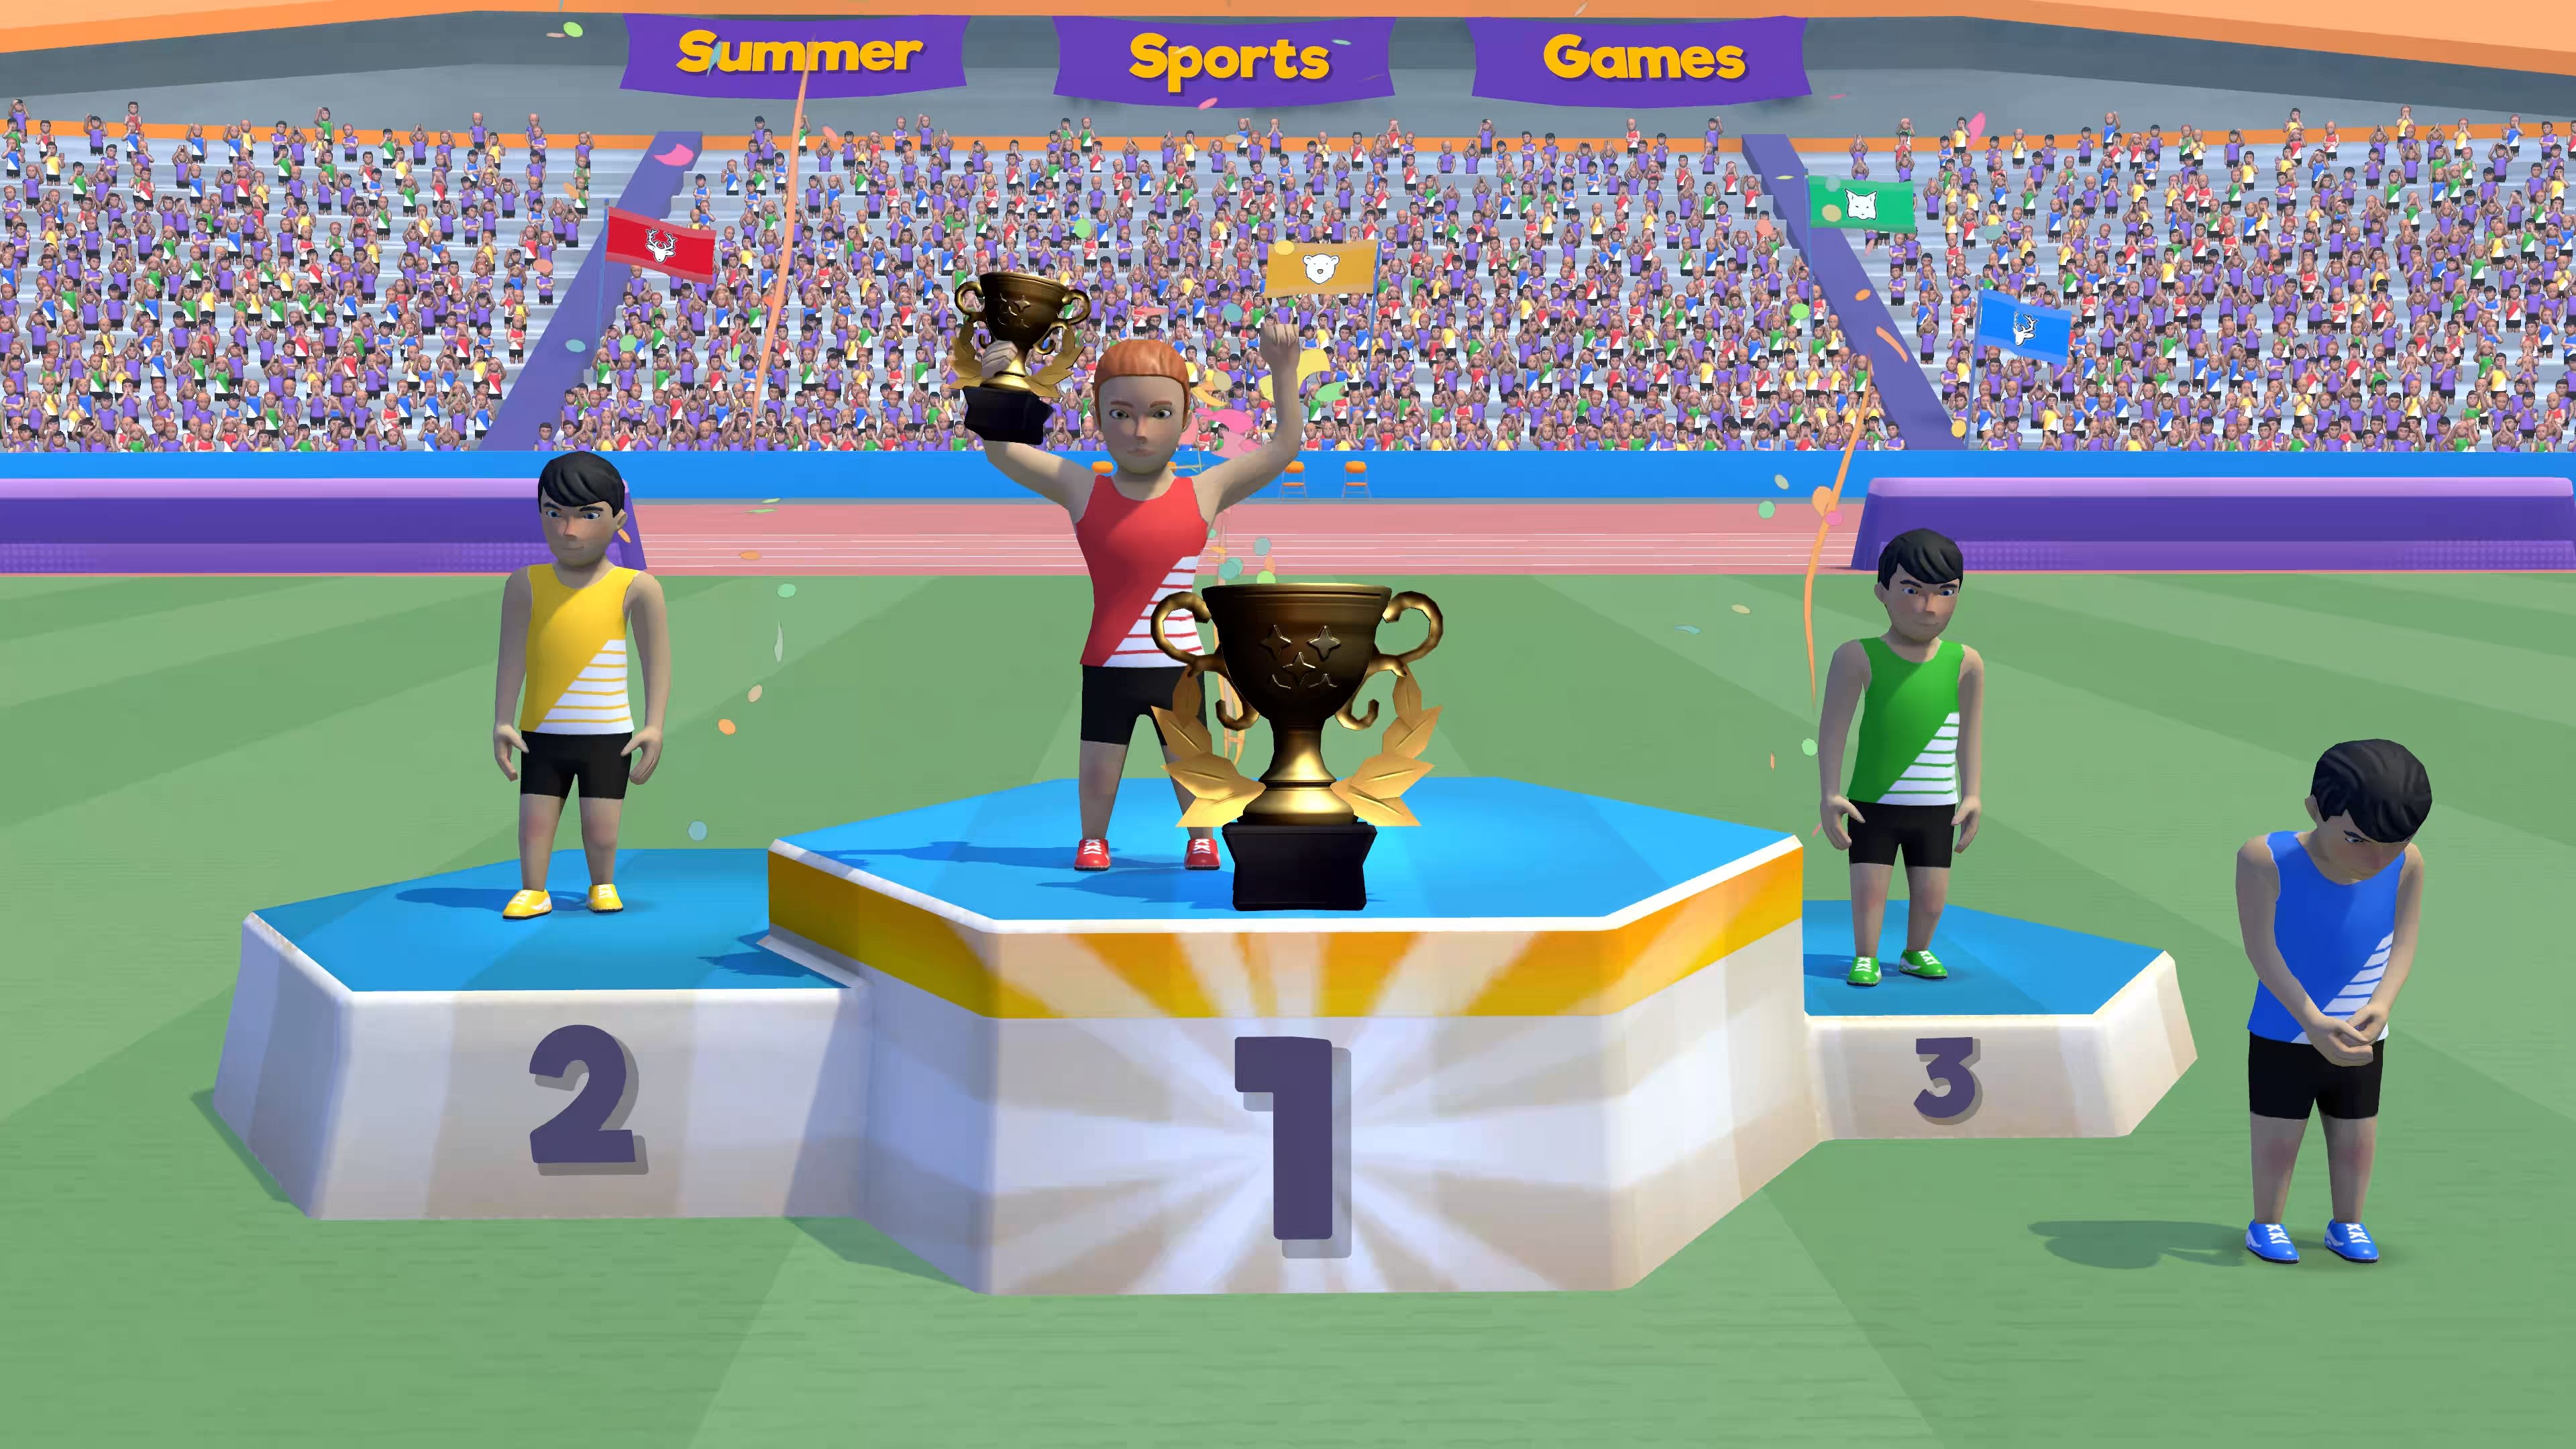 Sport and games we are. Summer Sports games. Гейм спорт. Wi Sports игра.